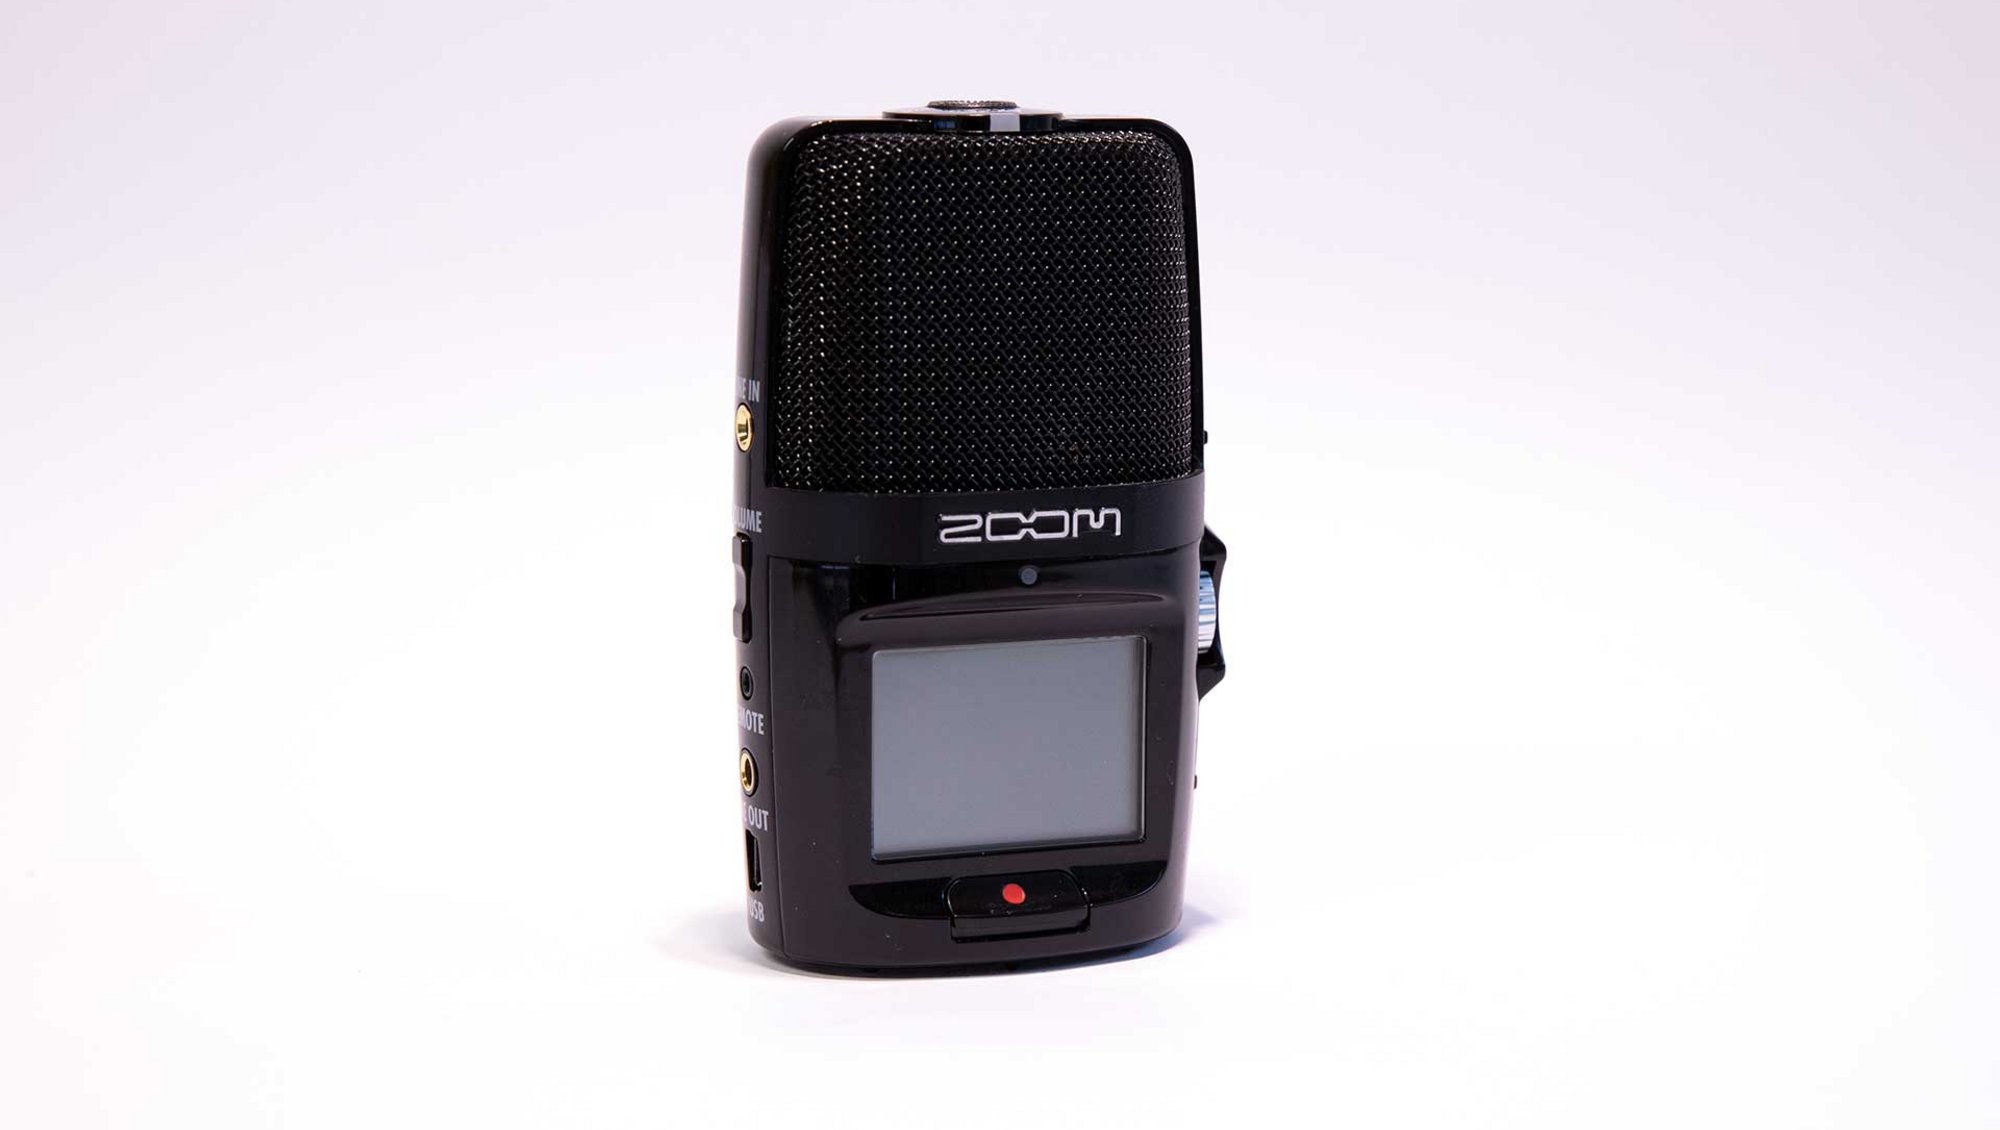 [Translate to English:] Zoom H2 audio recorder